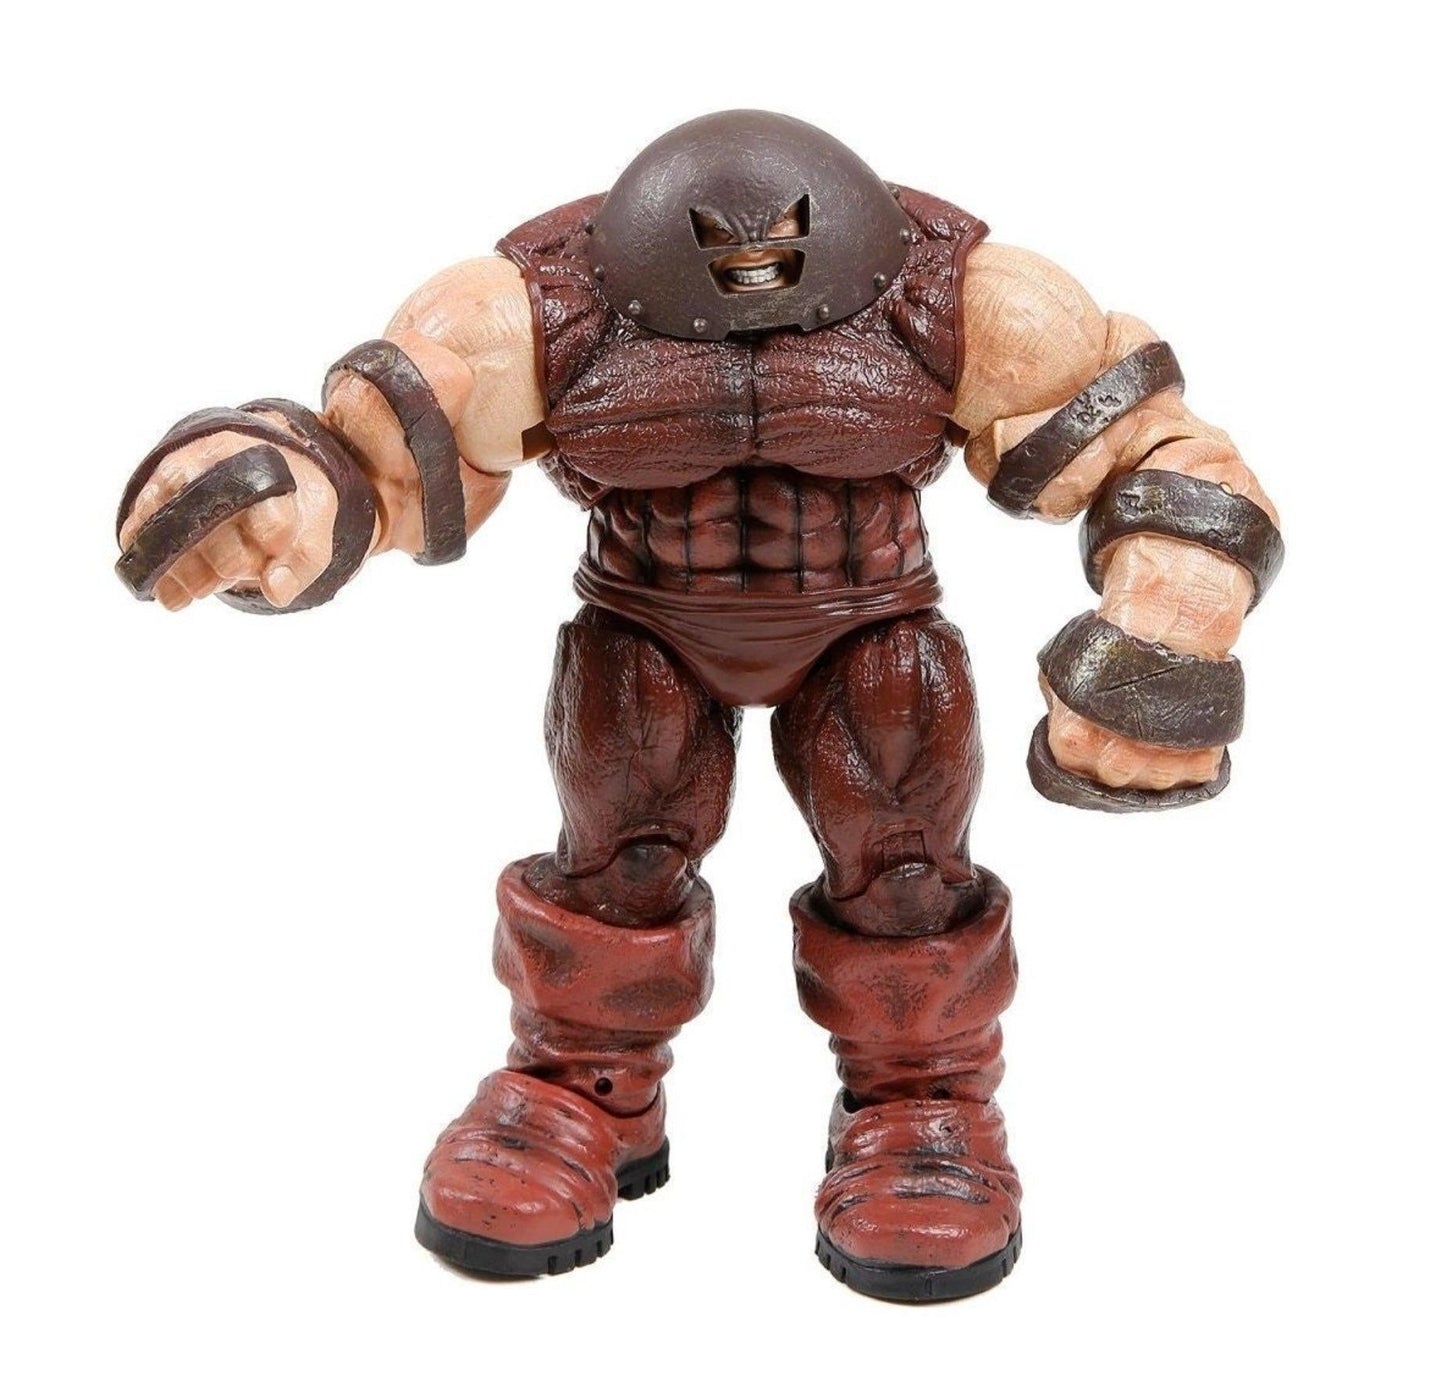 Marvel Select Juggernaut Action Figure - Special Collector's Edition - Logan's Toy Chest